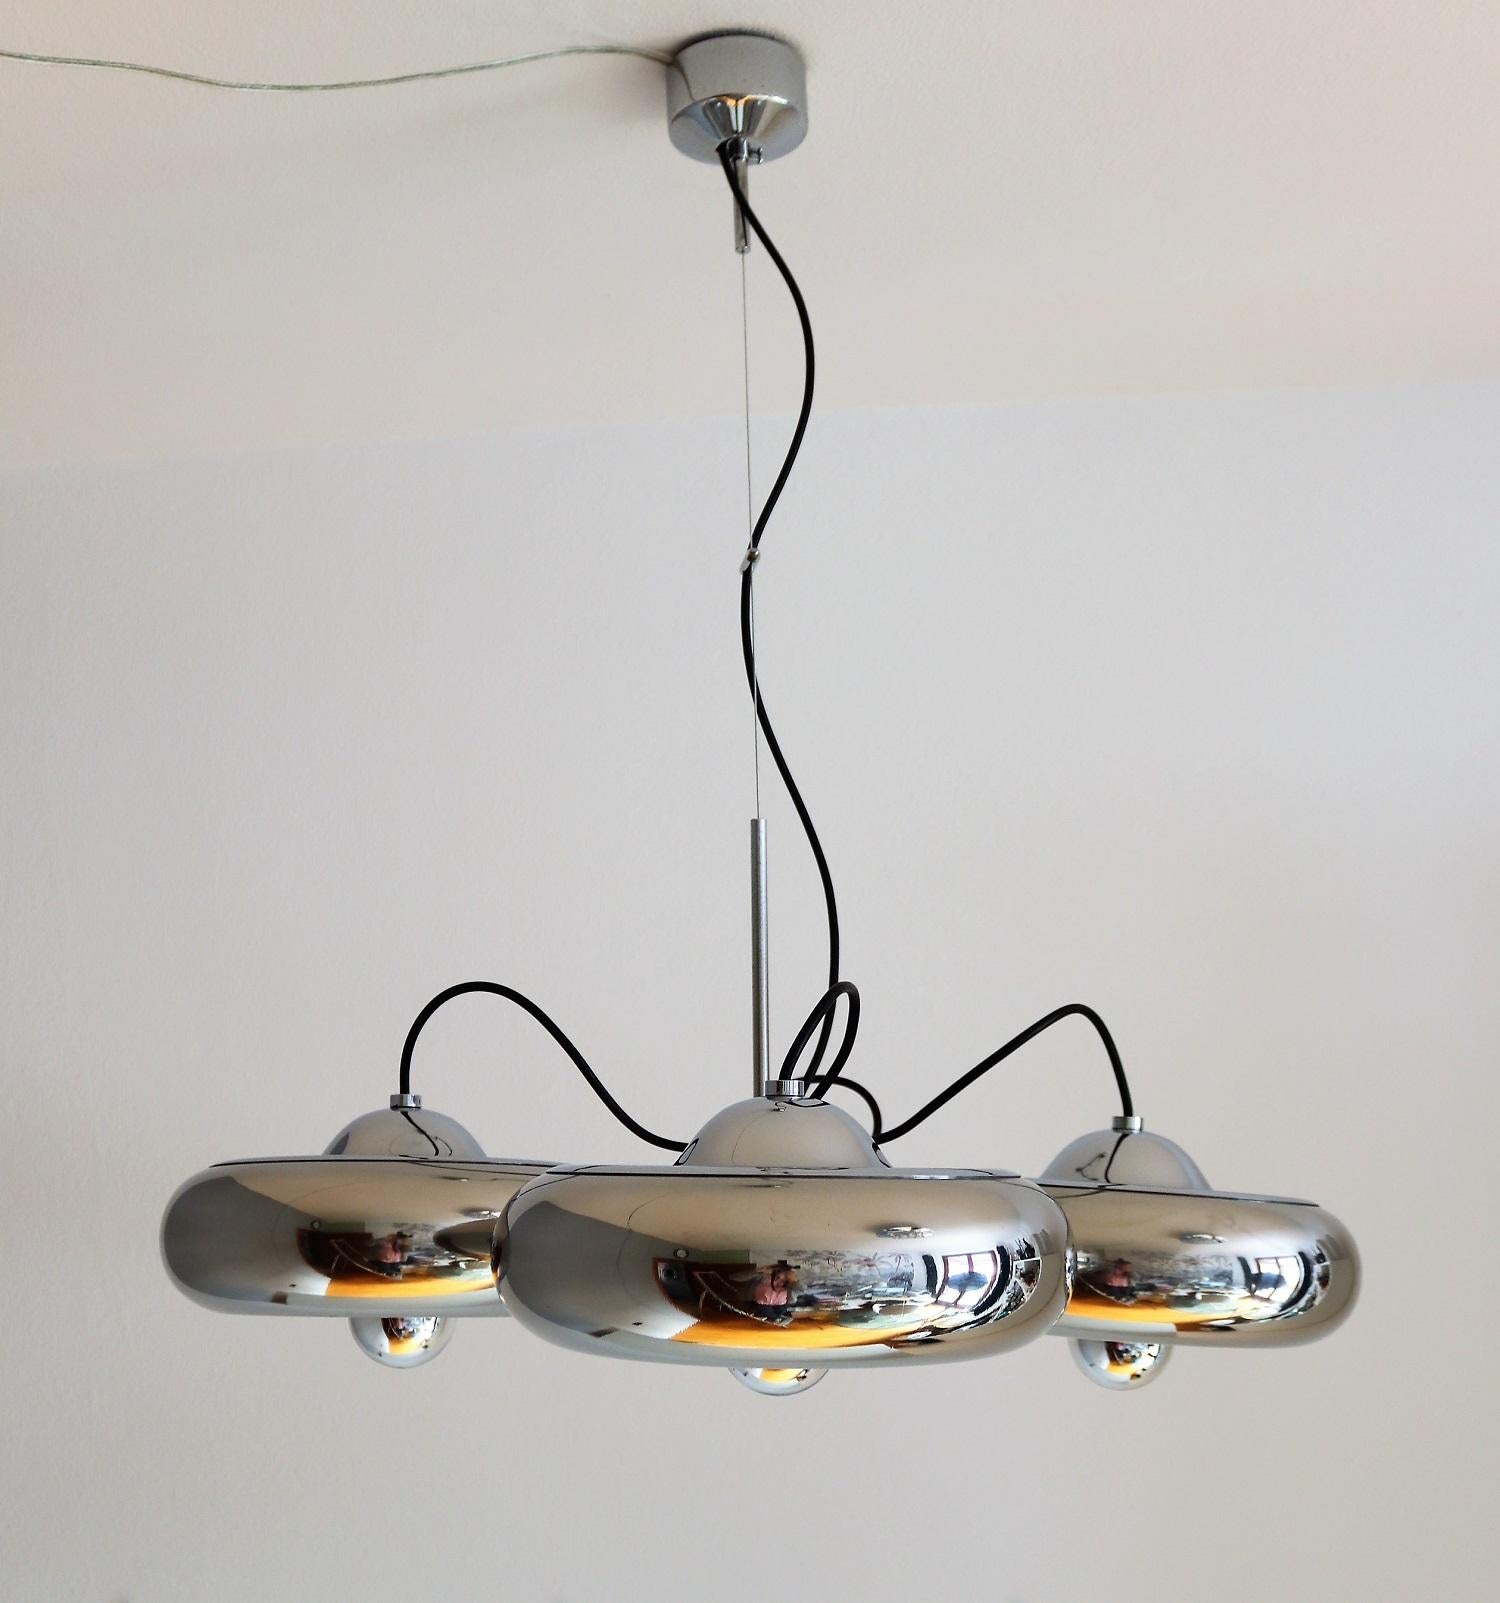 Gorgeous and very particular pendant lamp with four lights which are adjustable separately. Made in Italy in the 1970s by Luci Milano.
The four light bodies in the style of flying saucers are completely chromed and are equipped each with one bulb